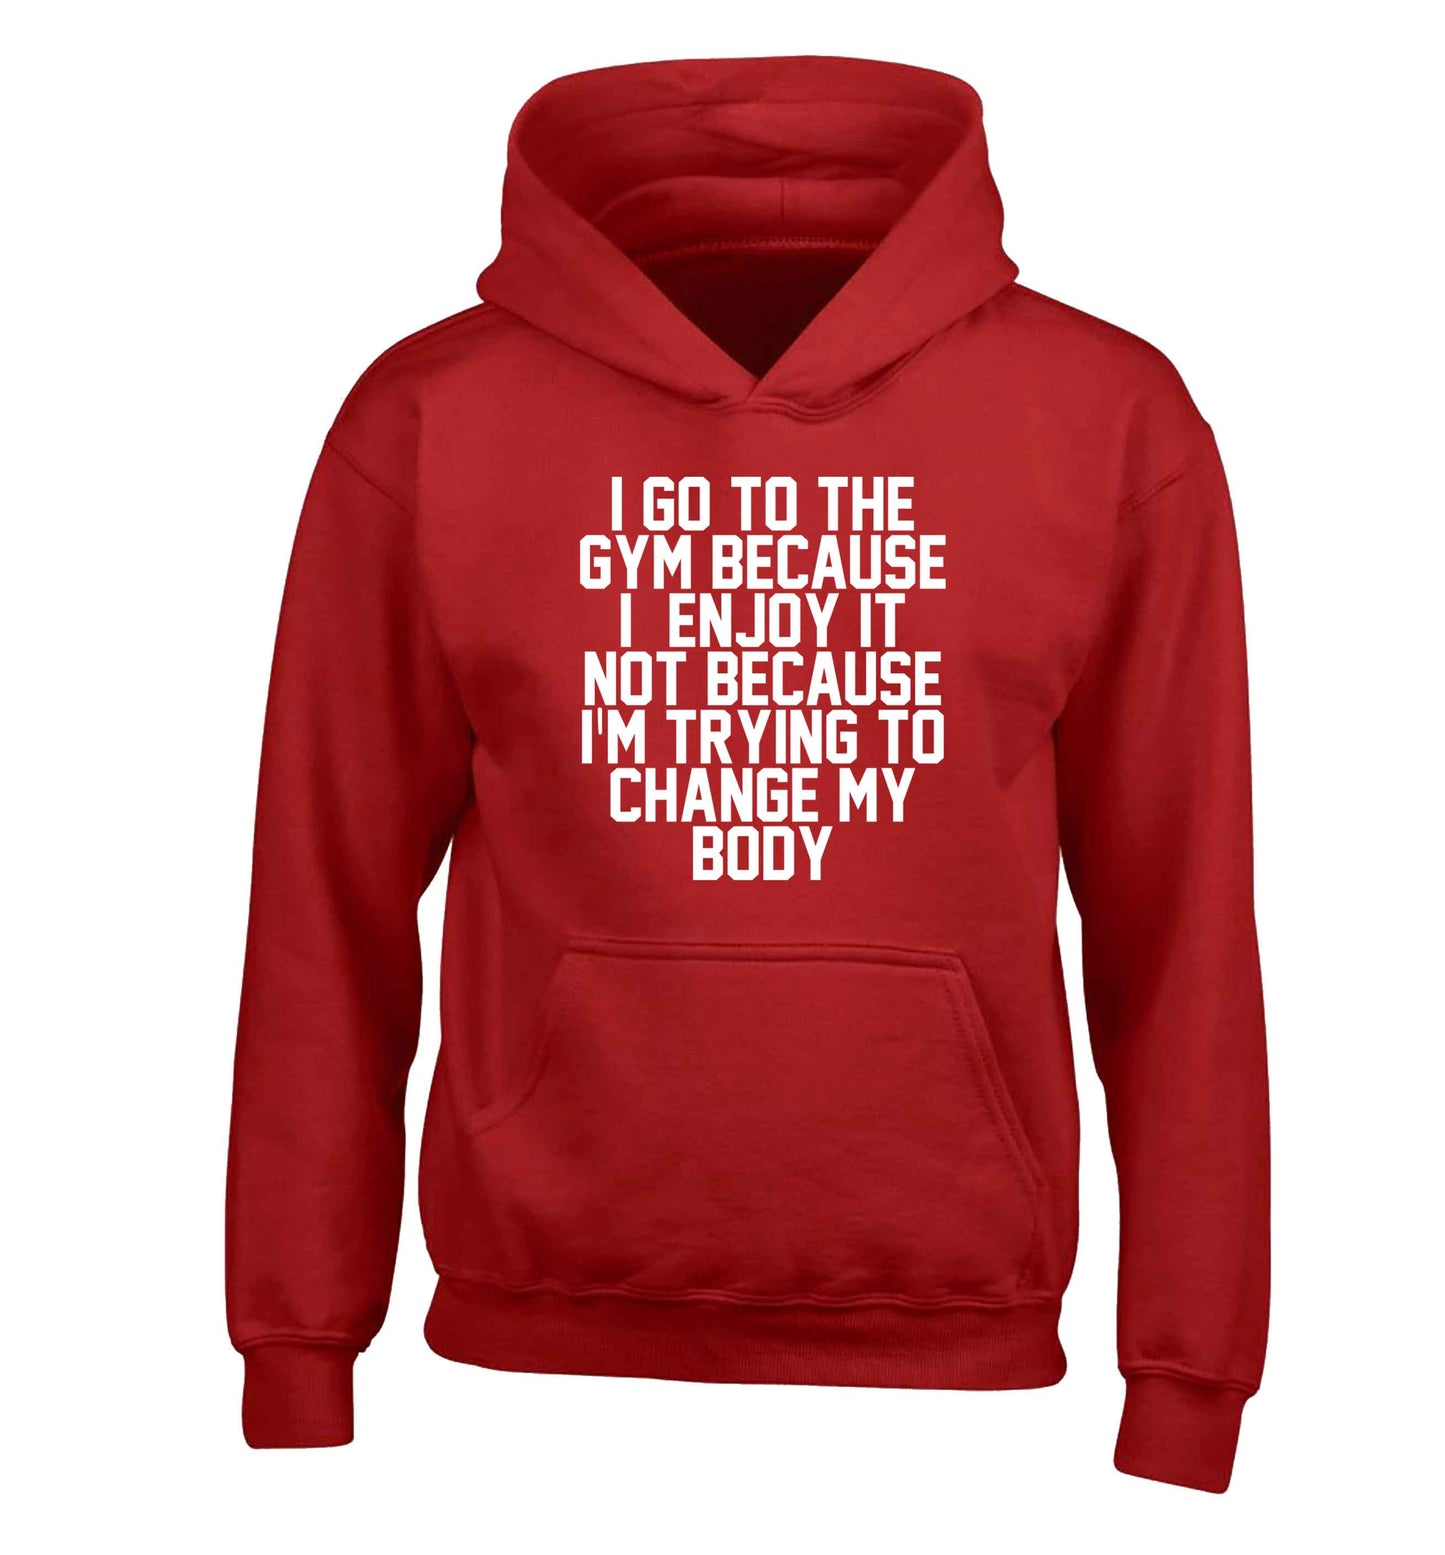 I go to the gym because I enjoy it not because I'm trying to change my body children's red hoodie 12-13 Years